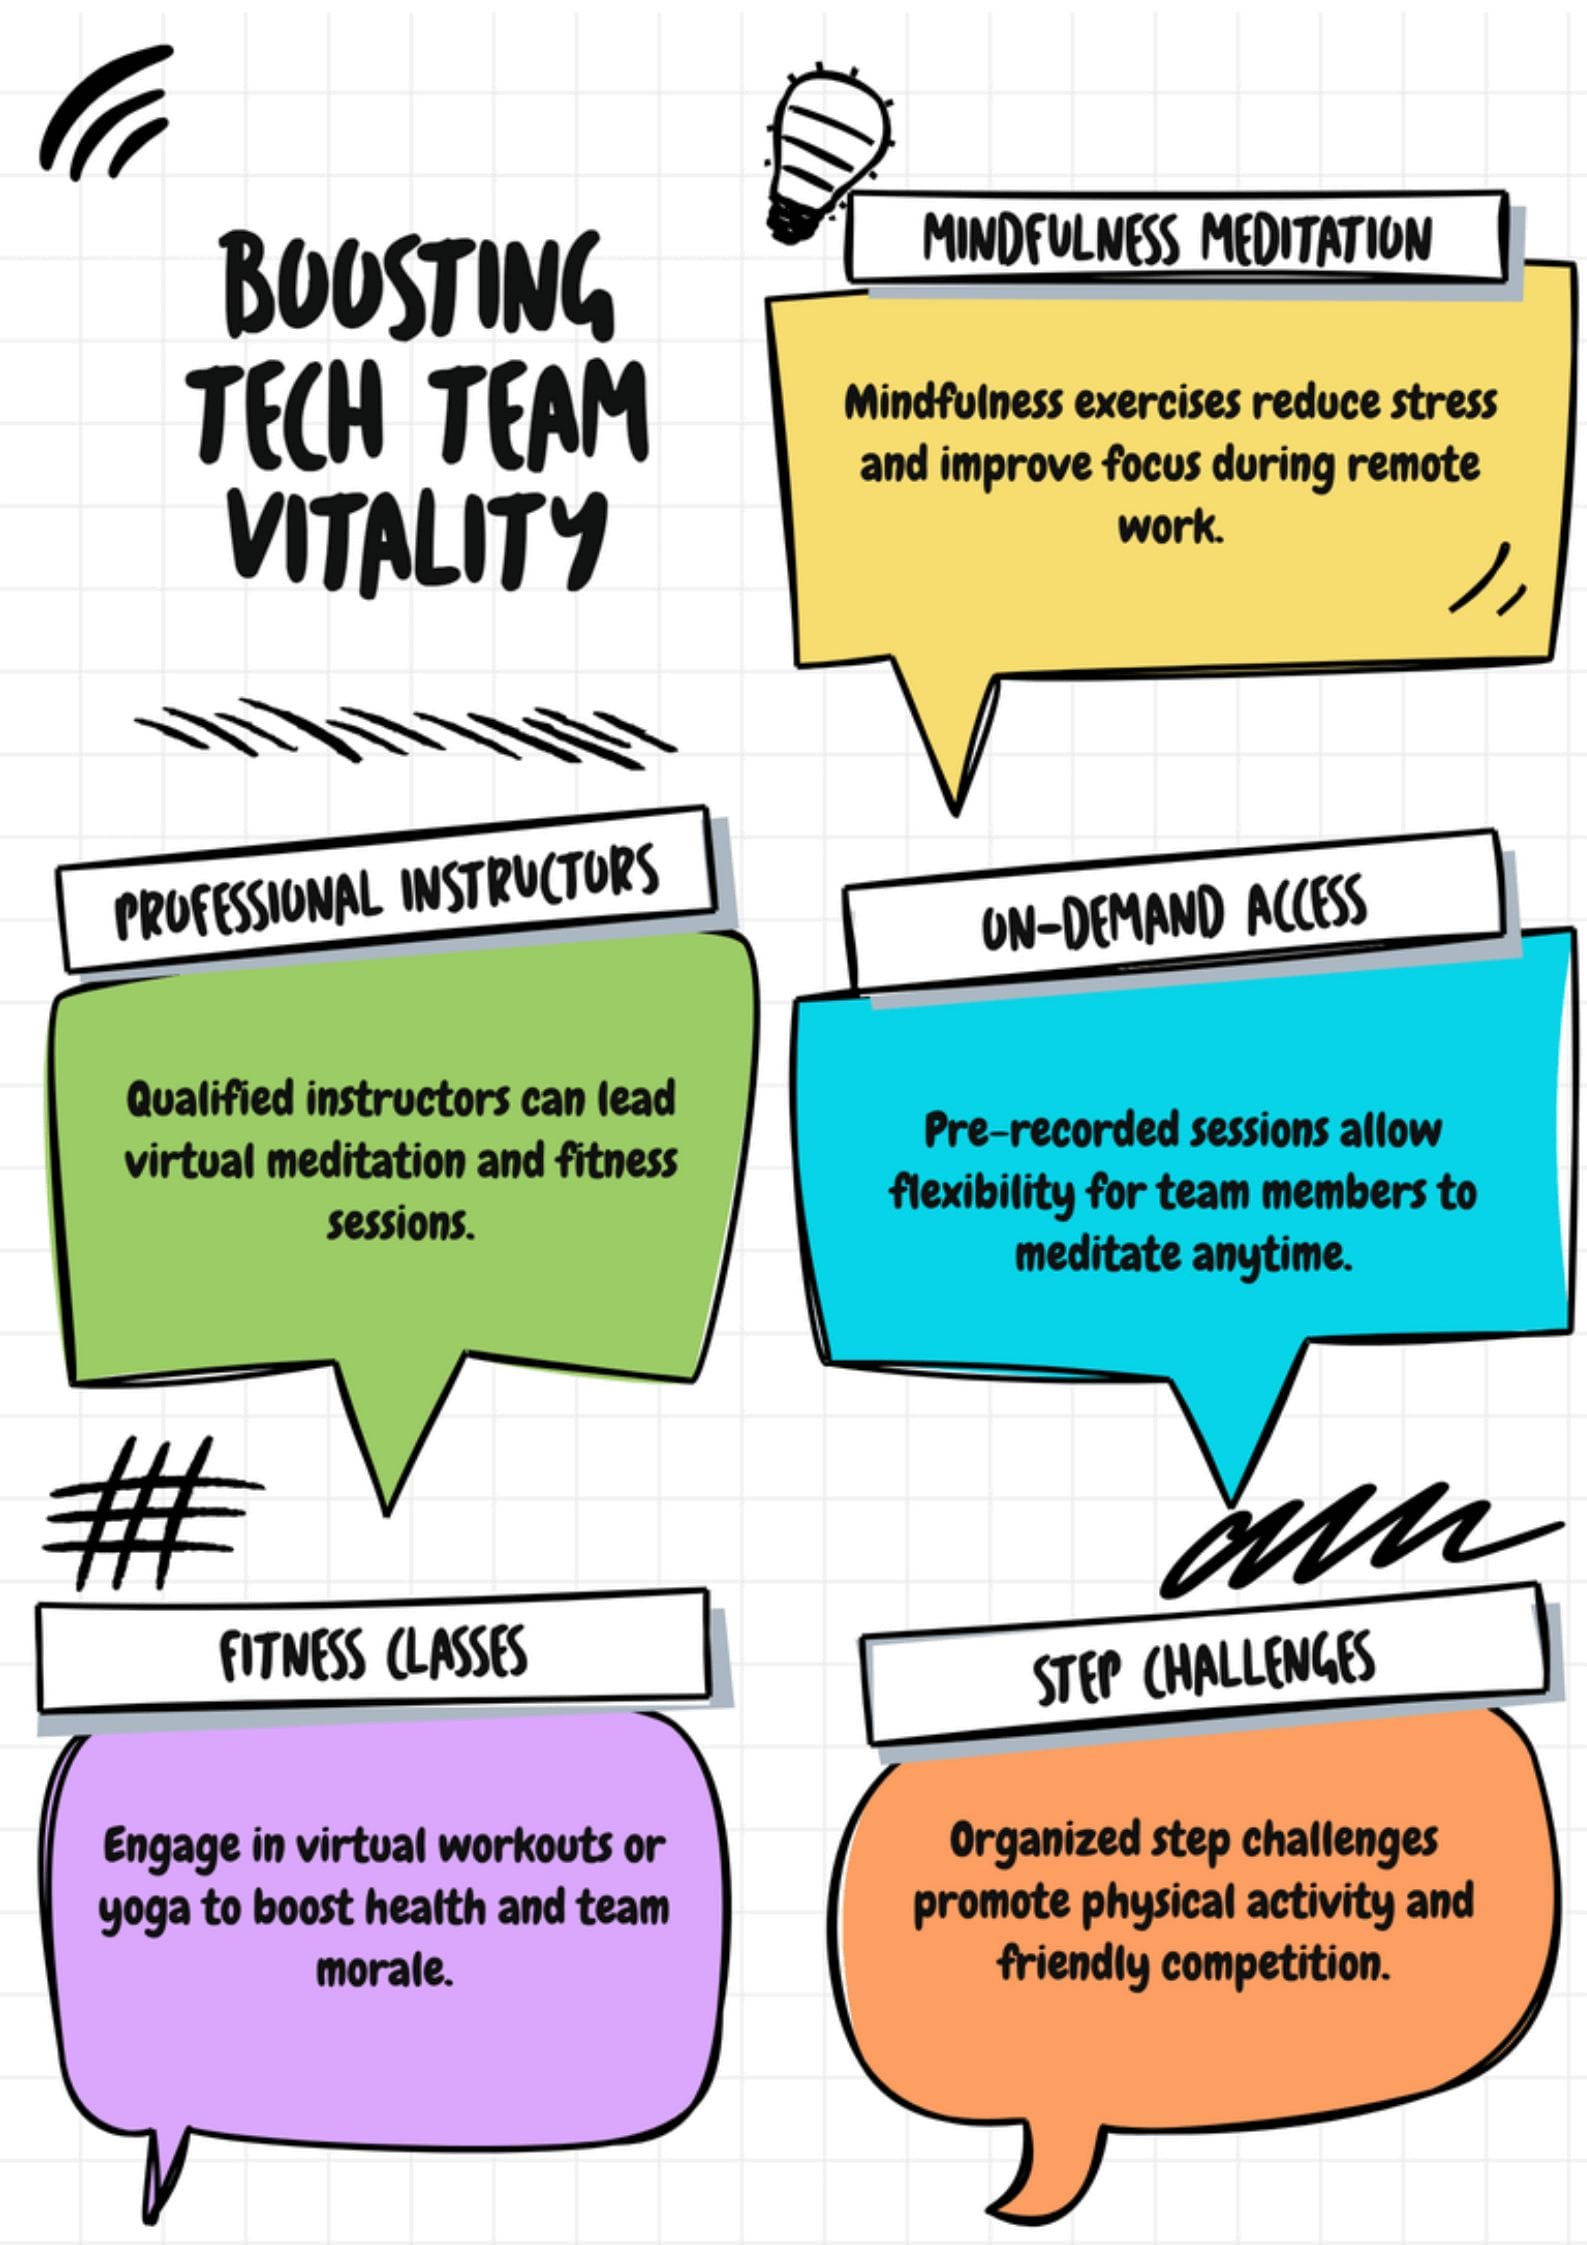 The Power of Virtual Wellness Sessions for Tech Teams